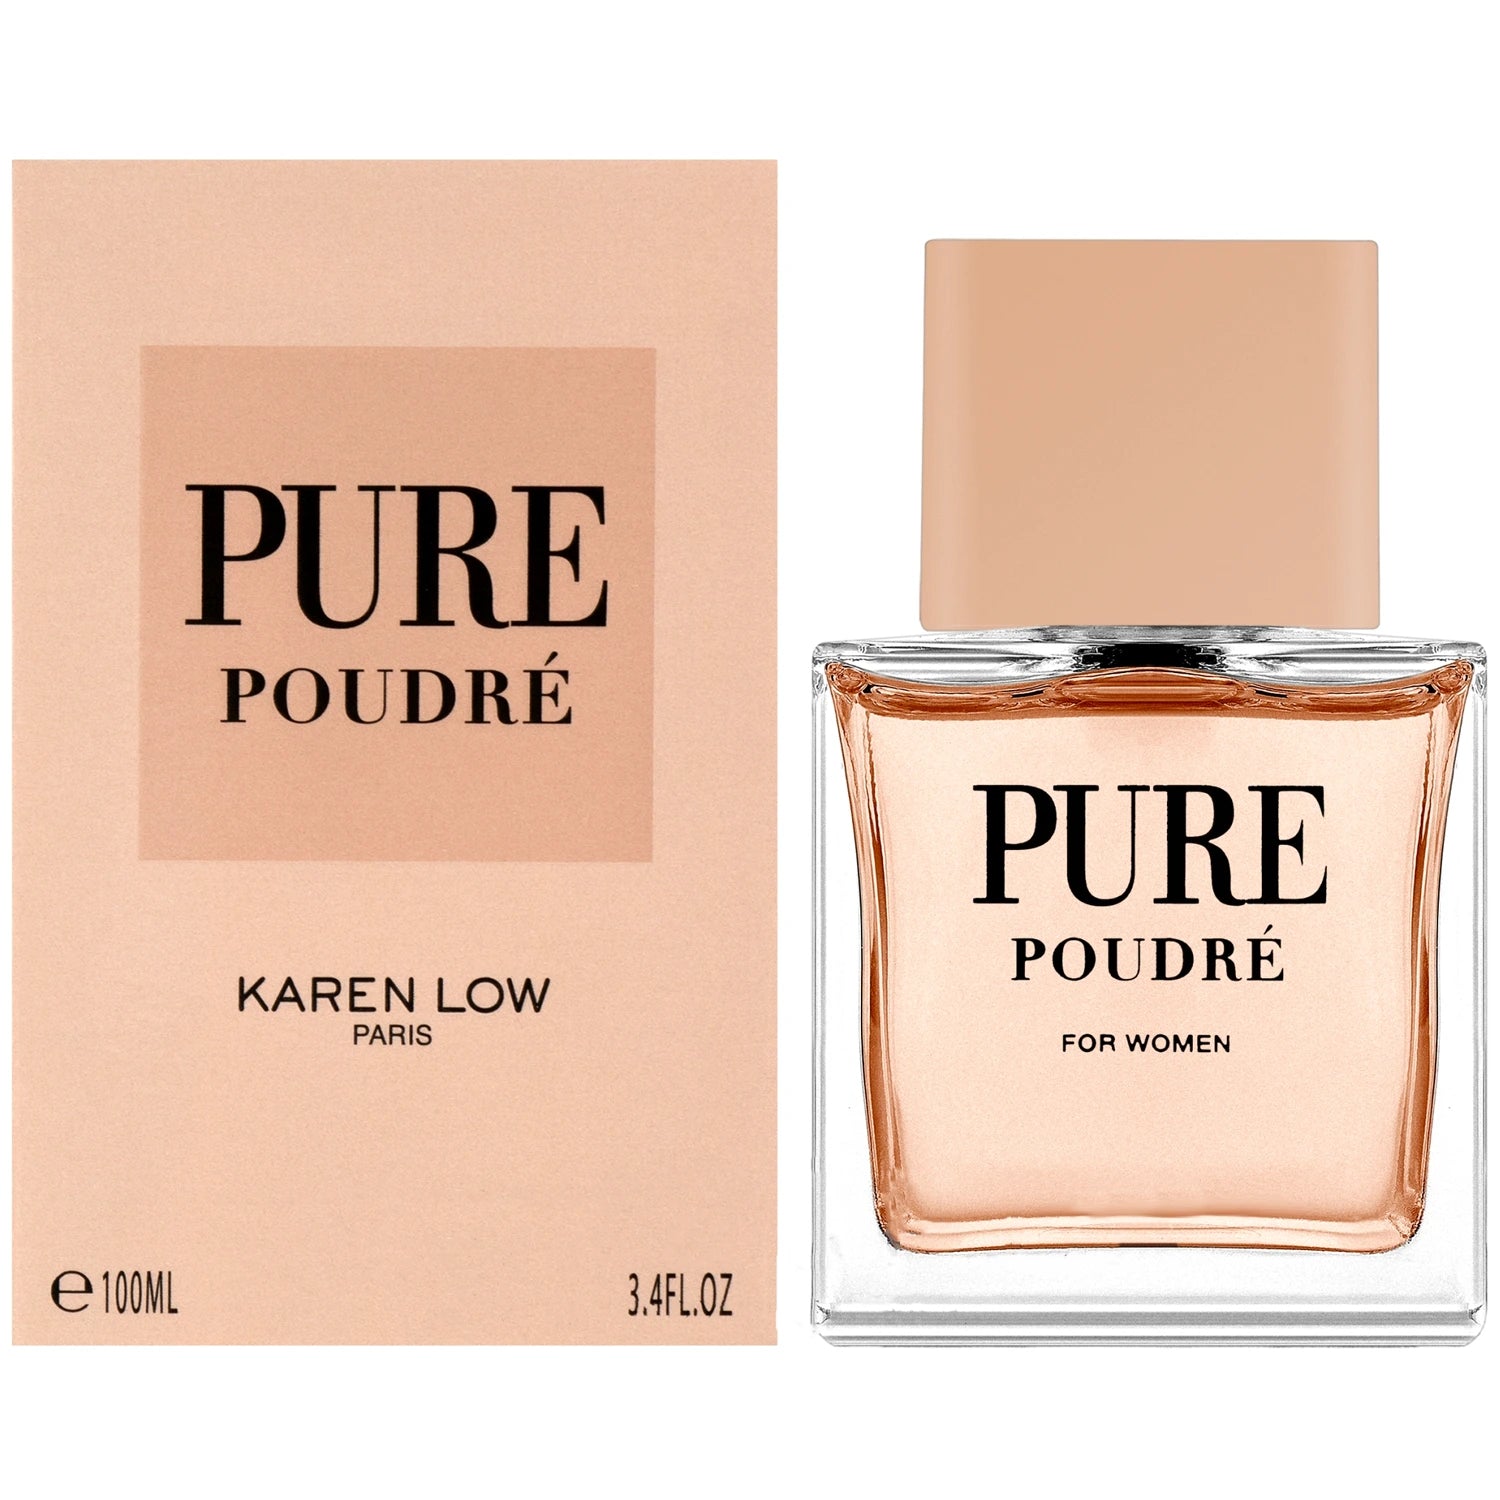 <p><em>INPSPIRED BY</em><strong> NARCISO RODRIGUEZ POUDREE</strong></p>
<p>Behold the beauty of Pure Poudre, a captivating scent that's sure to have you addicted! This 3.4 oz EDT for women is a mesmerizing combination of Bulgarian Rose, White Jasmine and Vetiver, Cedarwood atop a base of Musk. It's a showstopping scent sure to turn heads!</p>